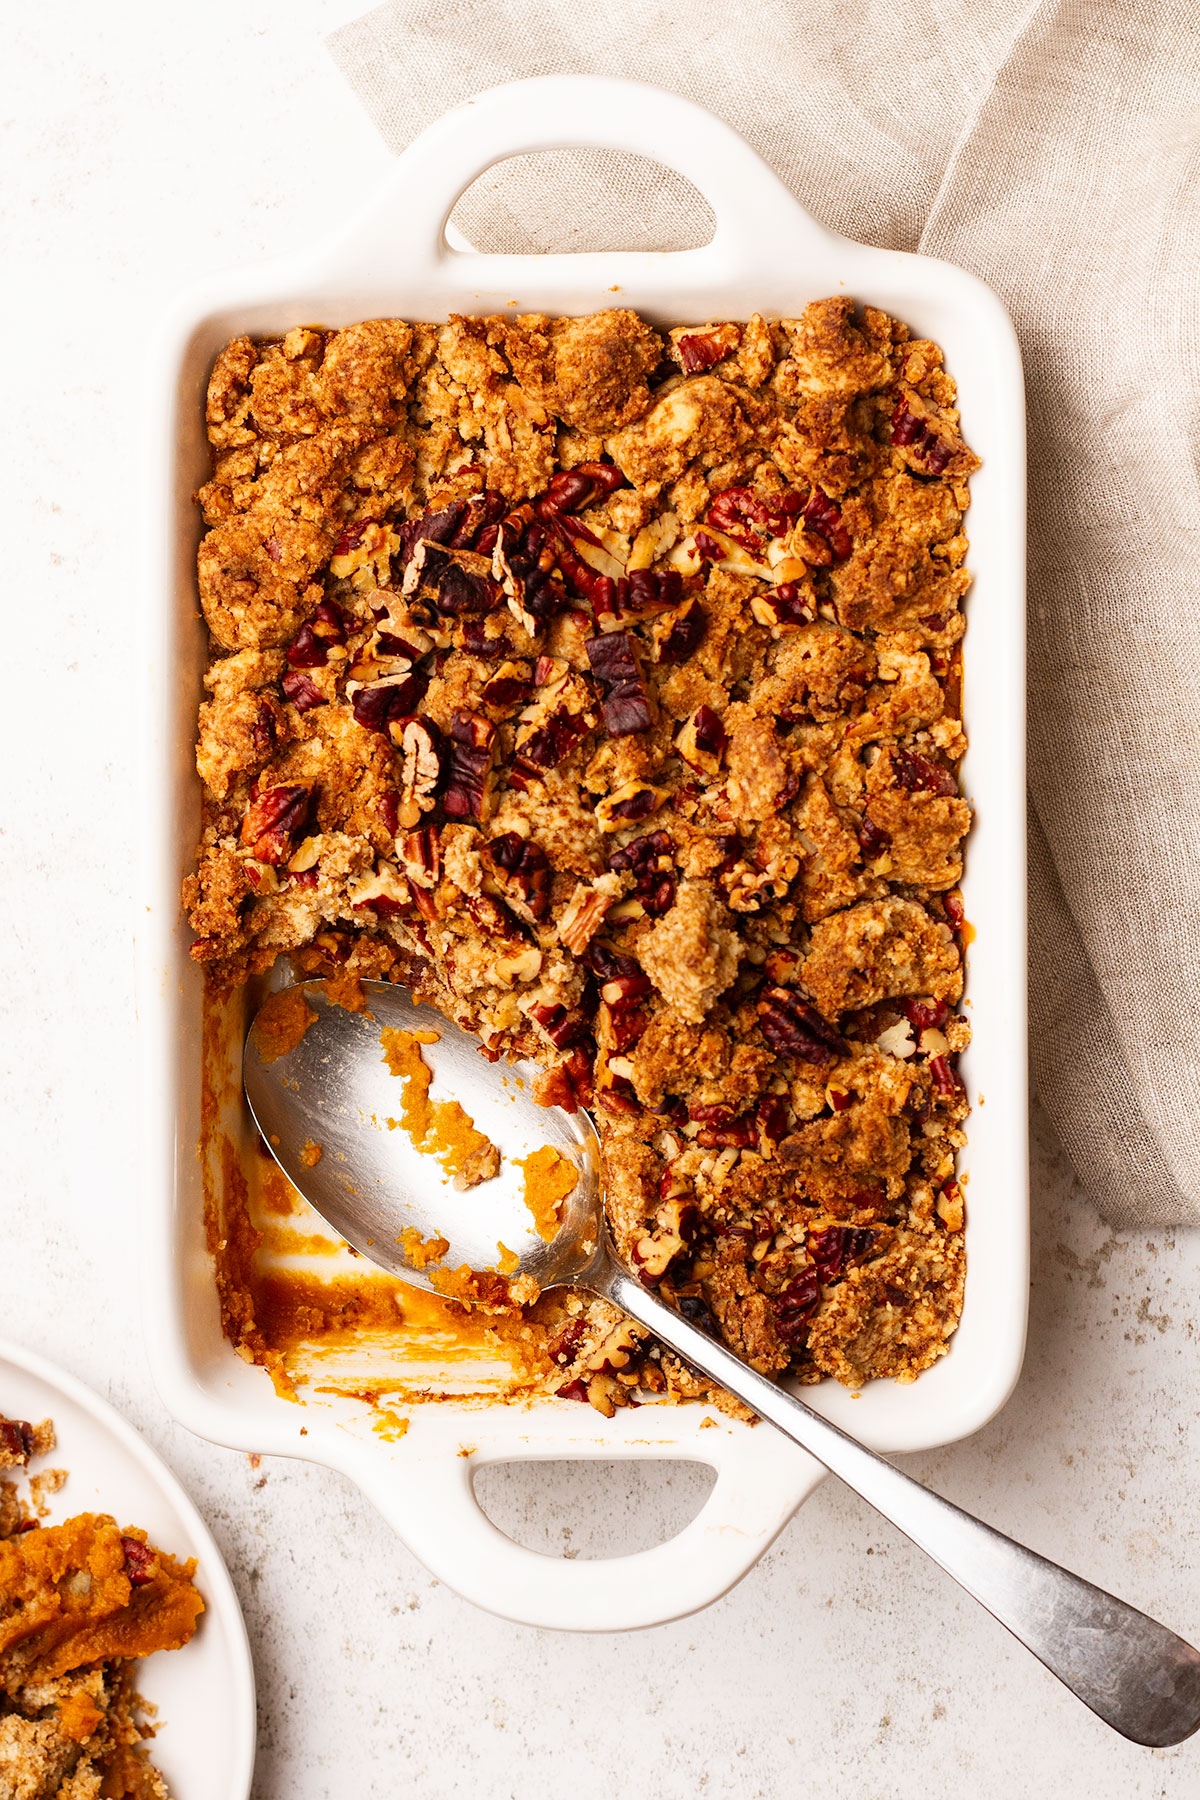 Sweet Potato Casserole being served from a white baking dish with a silver spoon, on a white and linen cloth background.